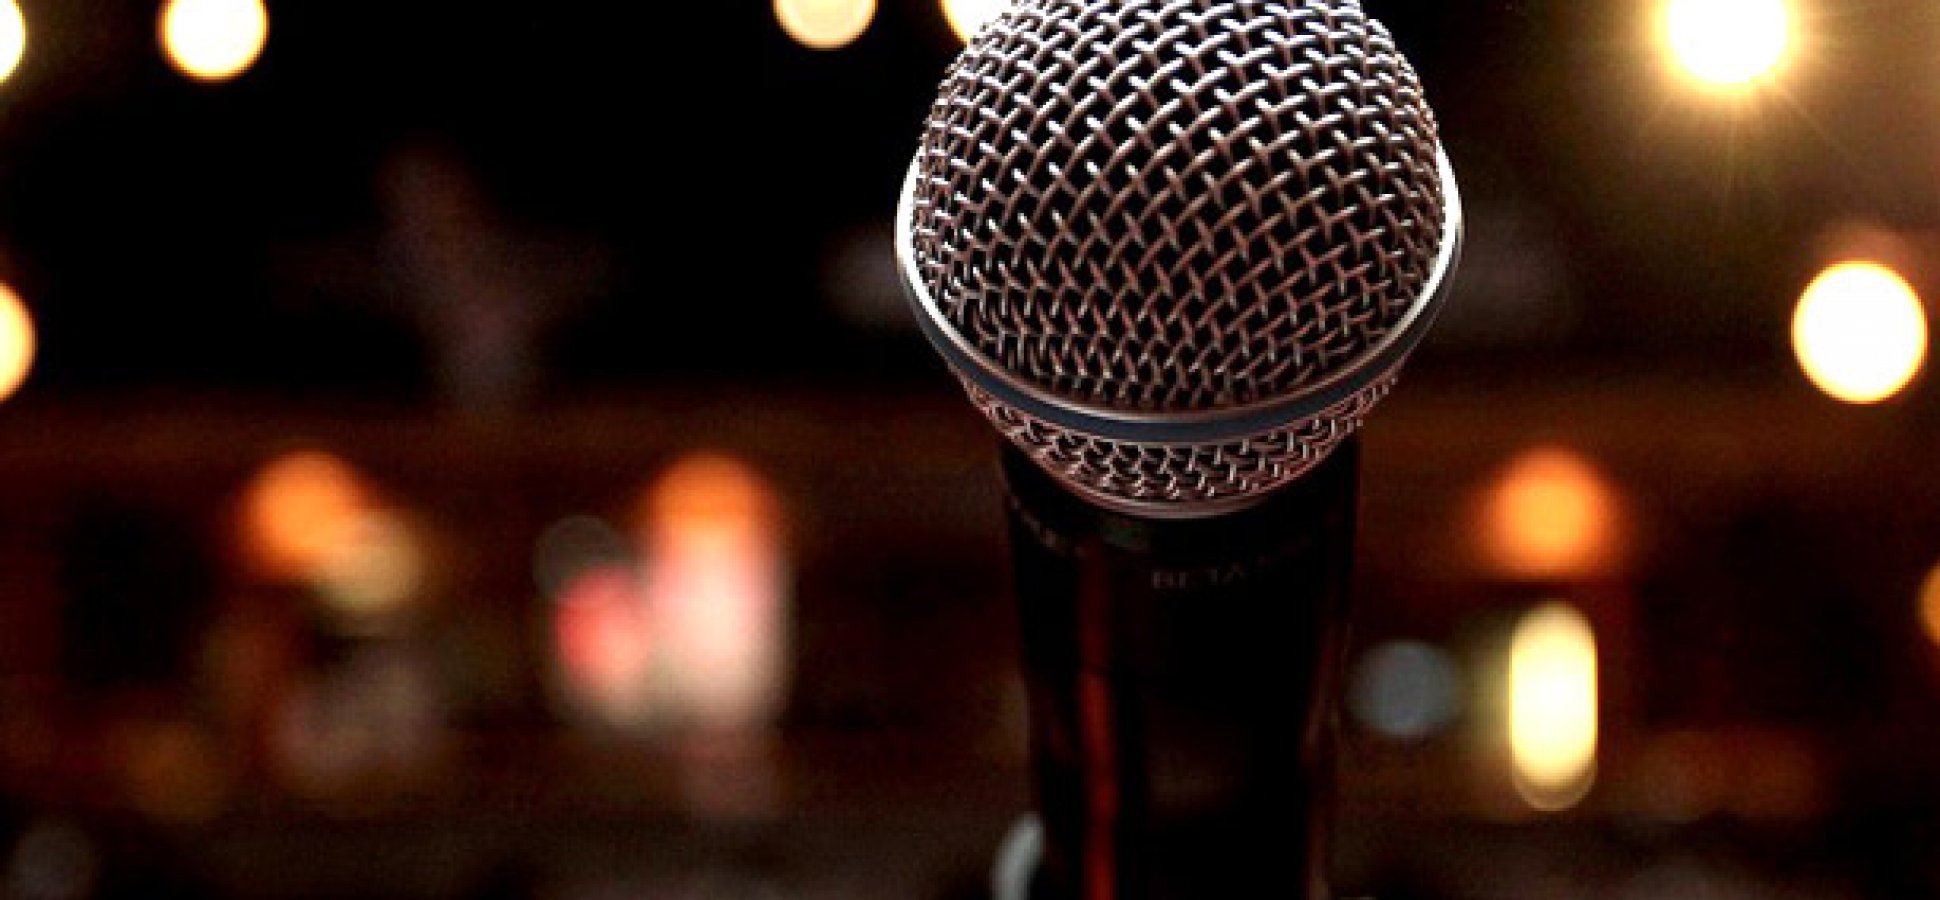 speaking wallpaper,microphone,audio equipment,microphone stand,technology,electronic device